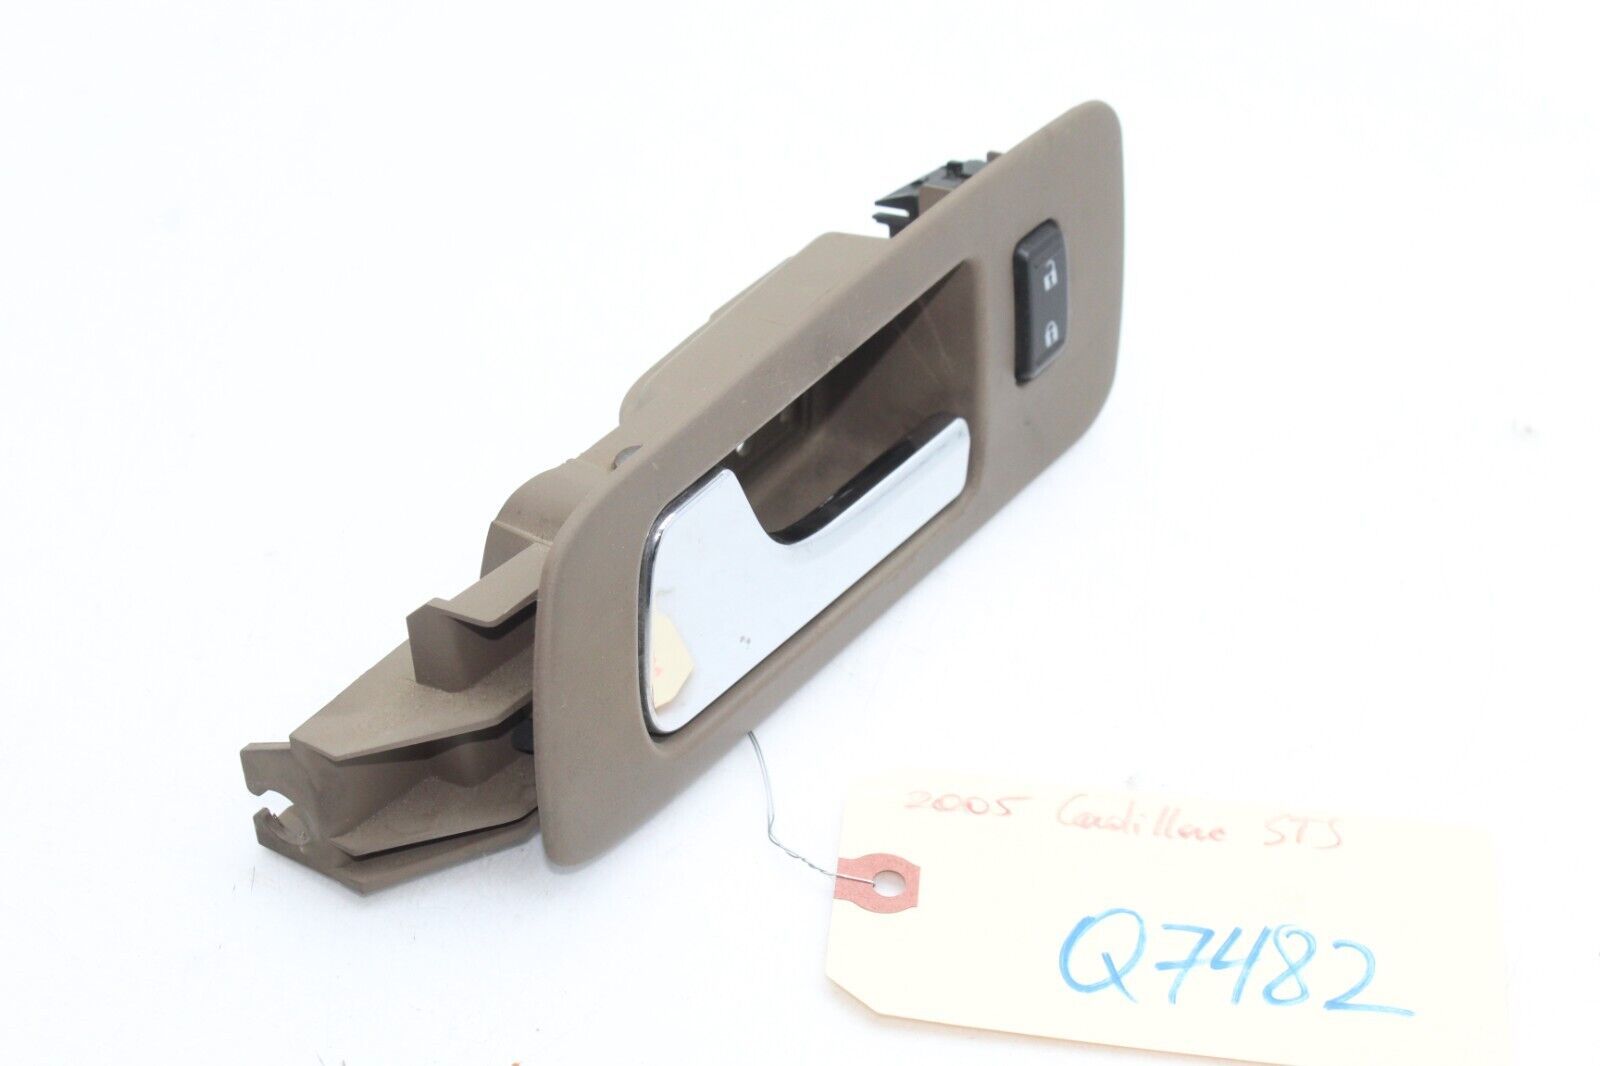 Primary image for 05-07 CADILLAC STS FRONT LEFT DRIVER INTERIOR DOOR HANDLE CASHMERE Q7482